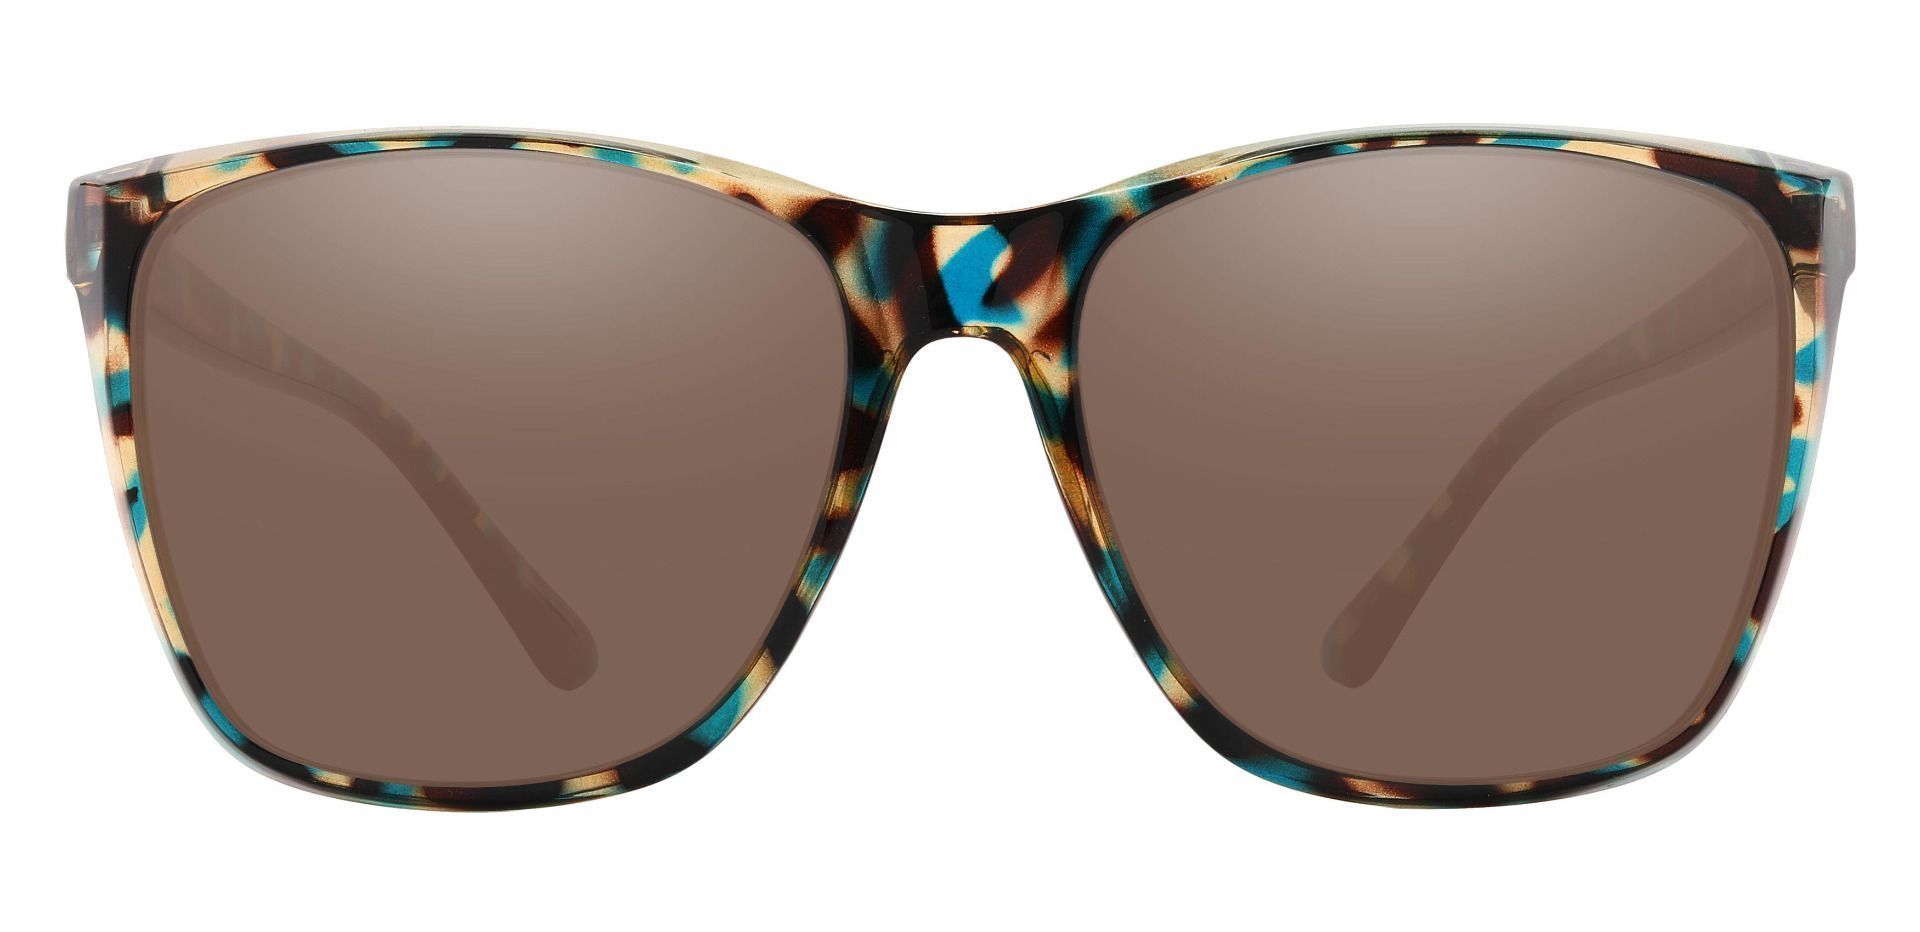 Taryn Square Prescription Sunglasses - Floral Frame With Brown Lenses